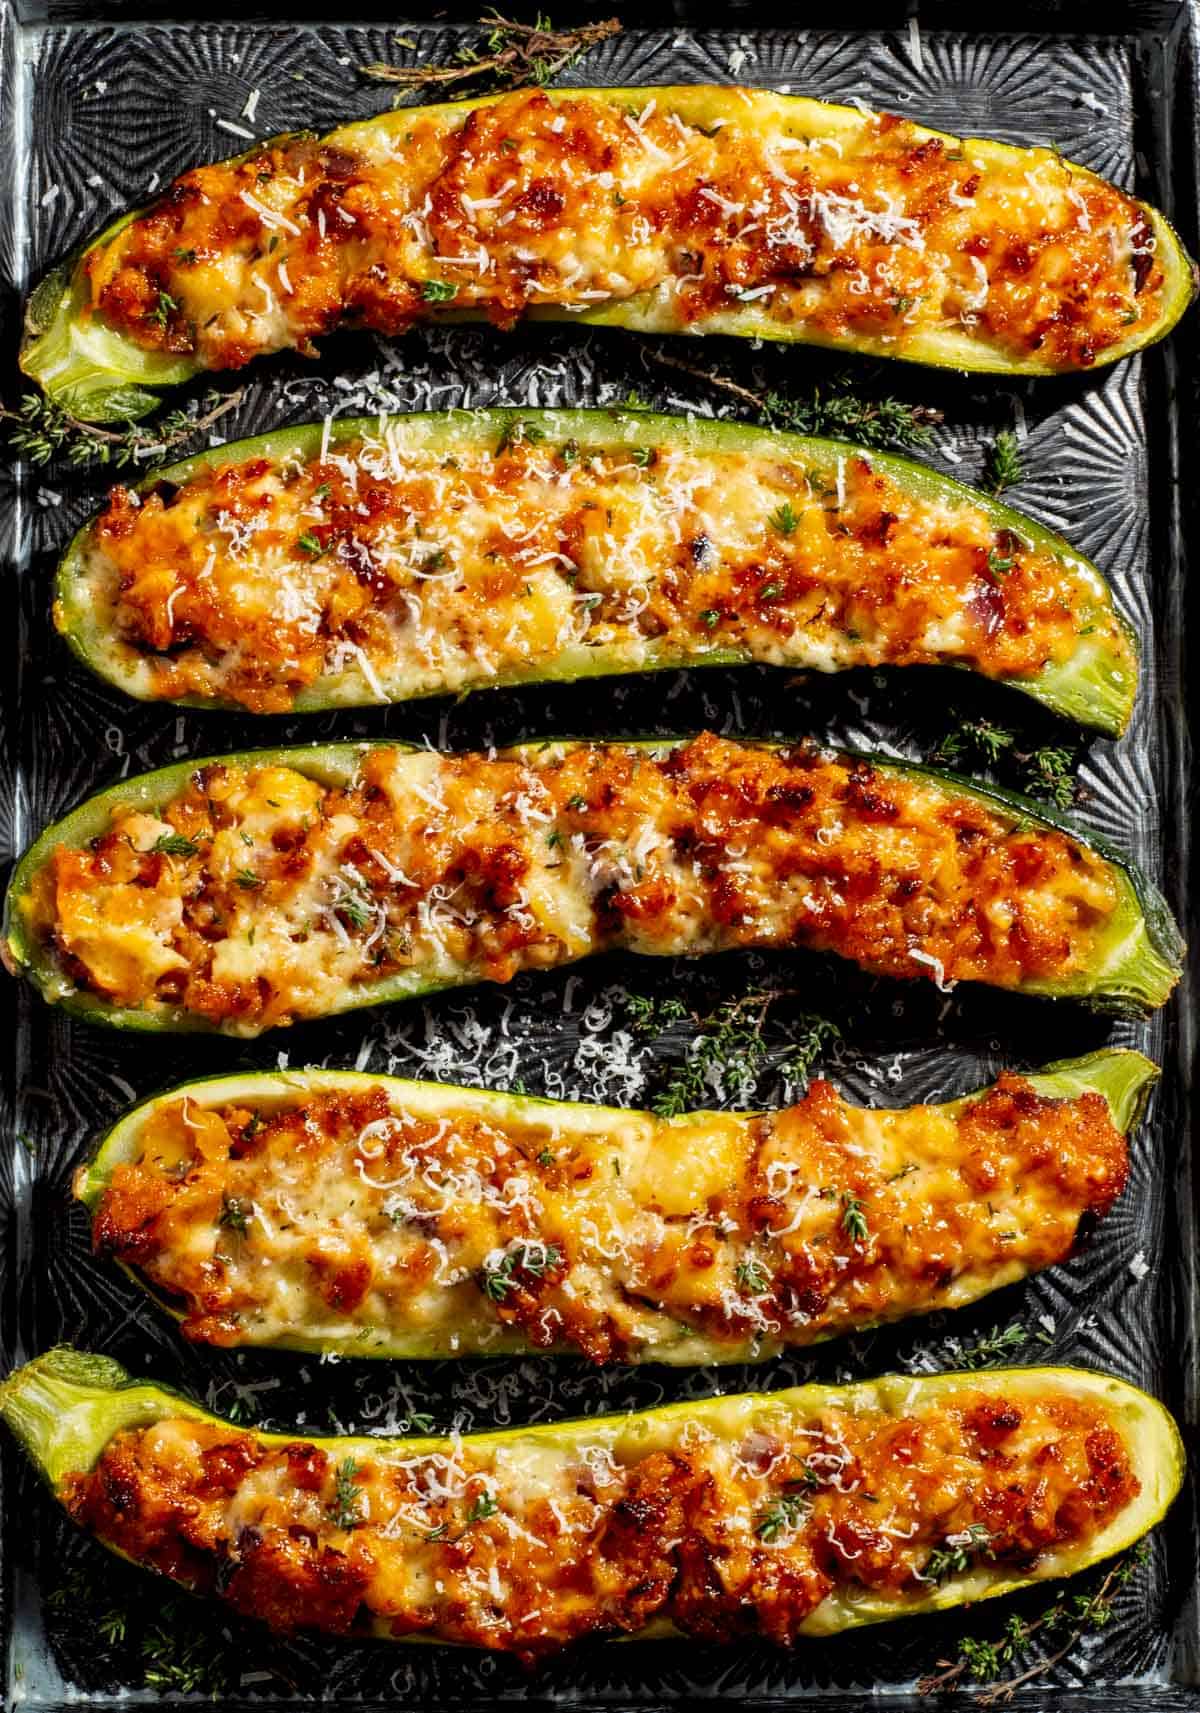 Stuffed courgettes on a baking tray with parmesan grated over.